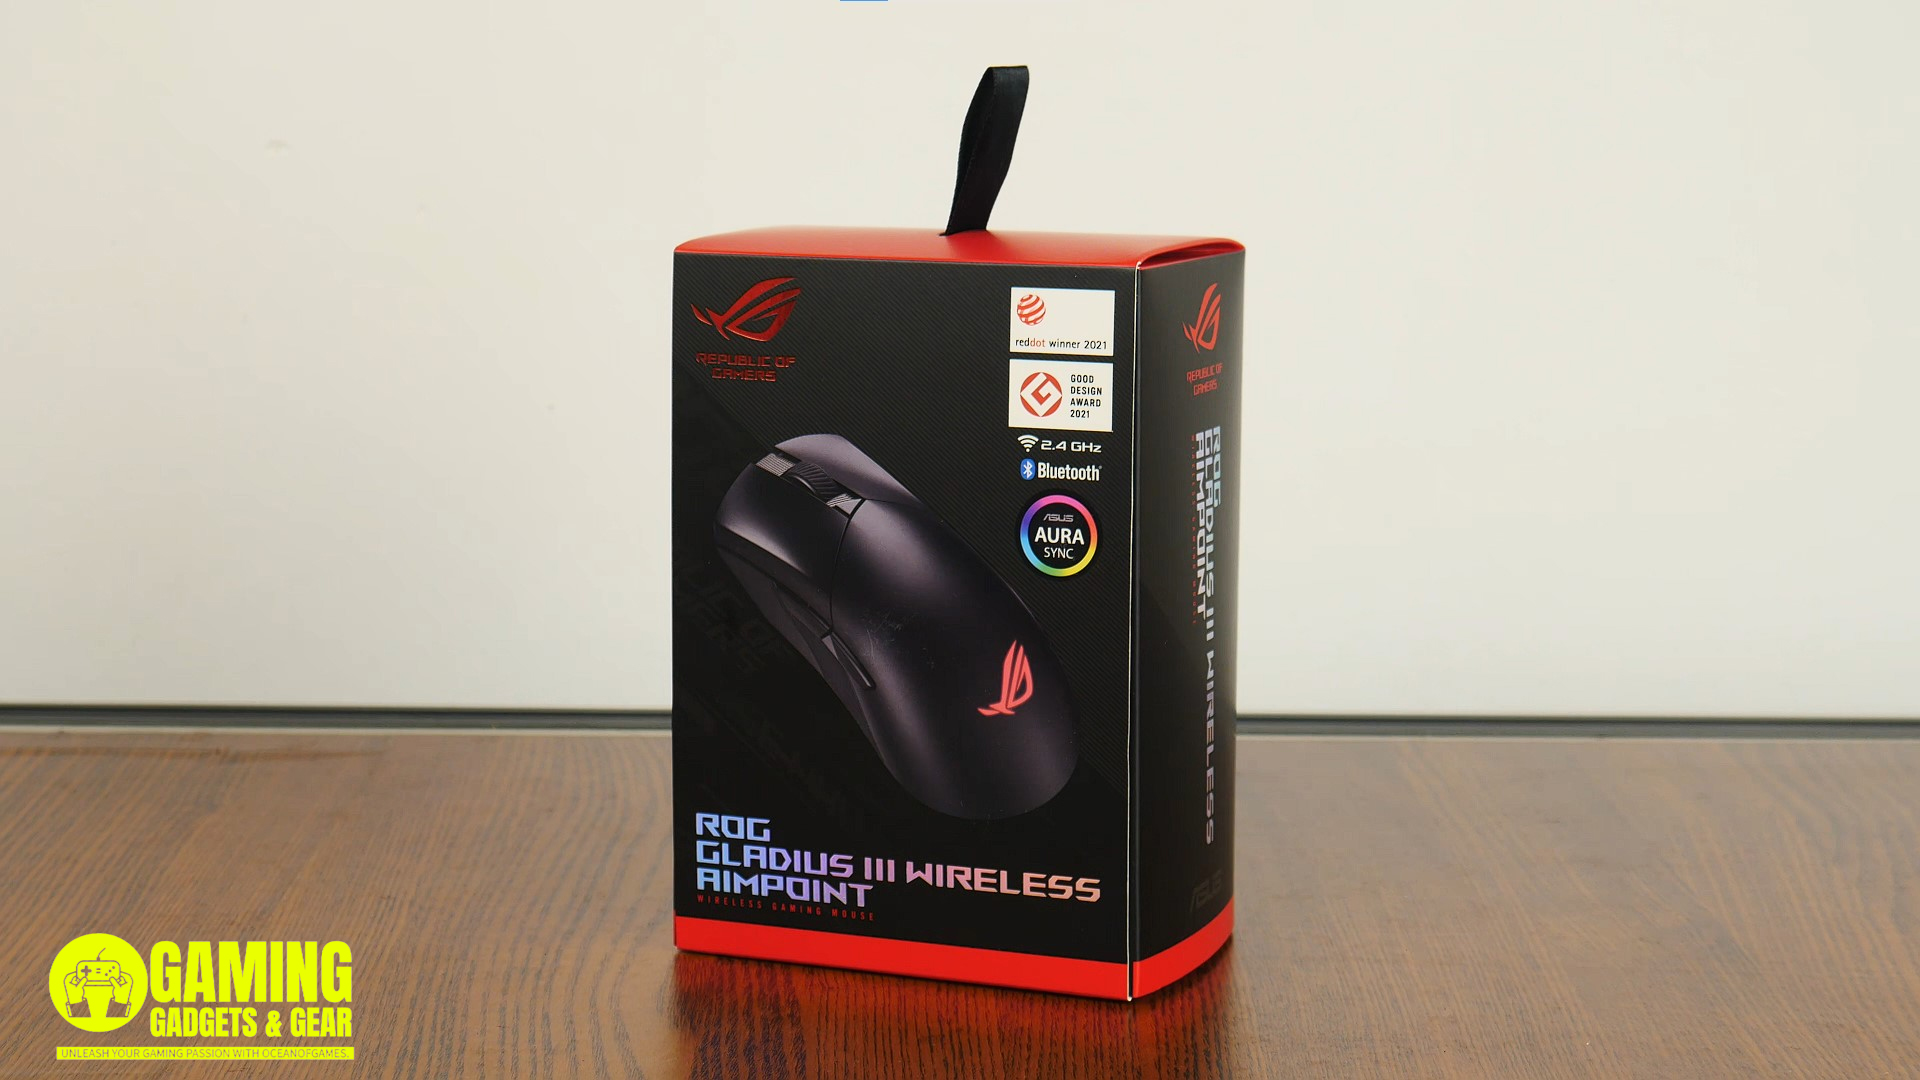 ASUS ROG Gladius III Wireless AimPoint Gaming Mouse_1